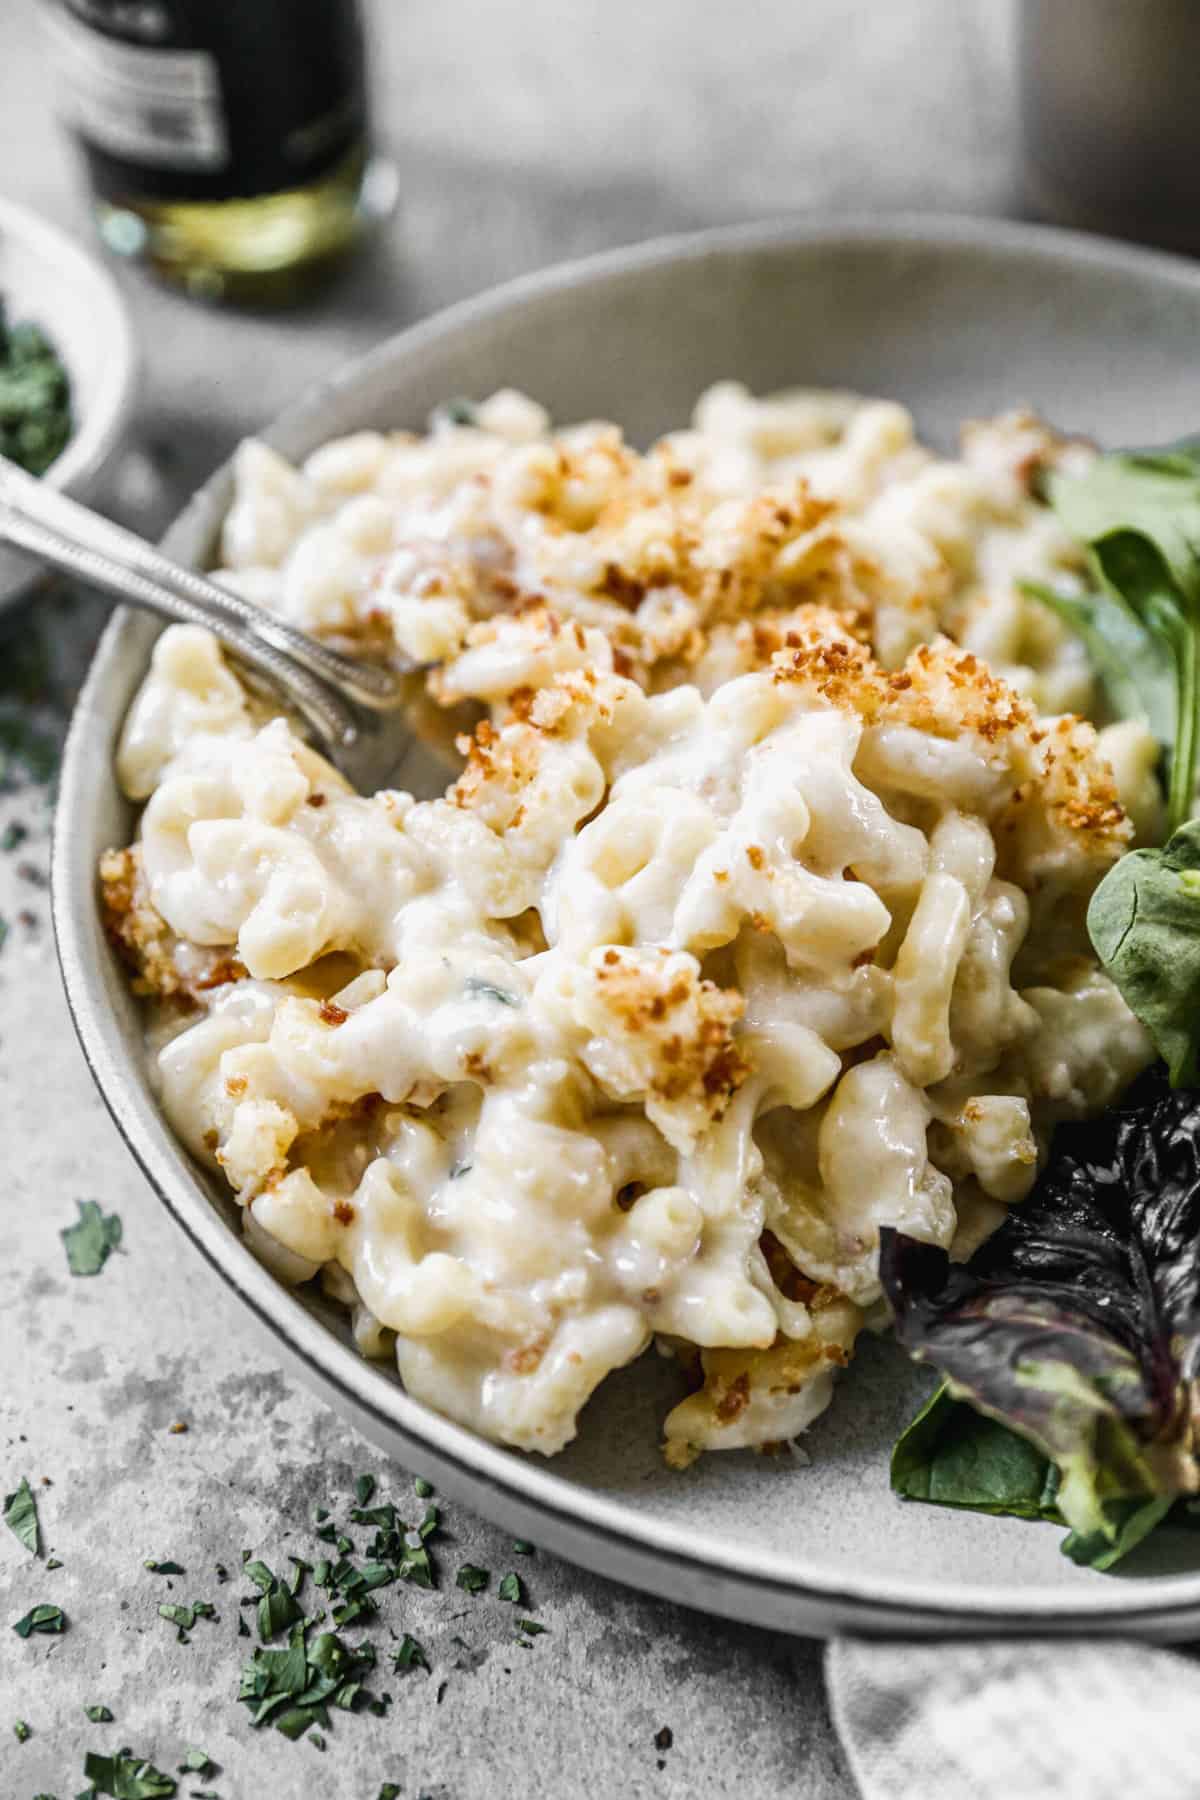 Truffle macaroni and cheese served on a plate with a green salad.